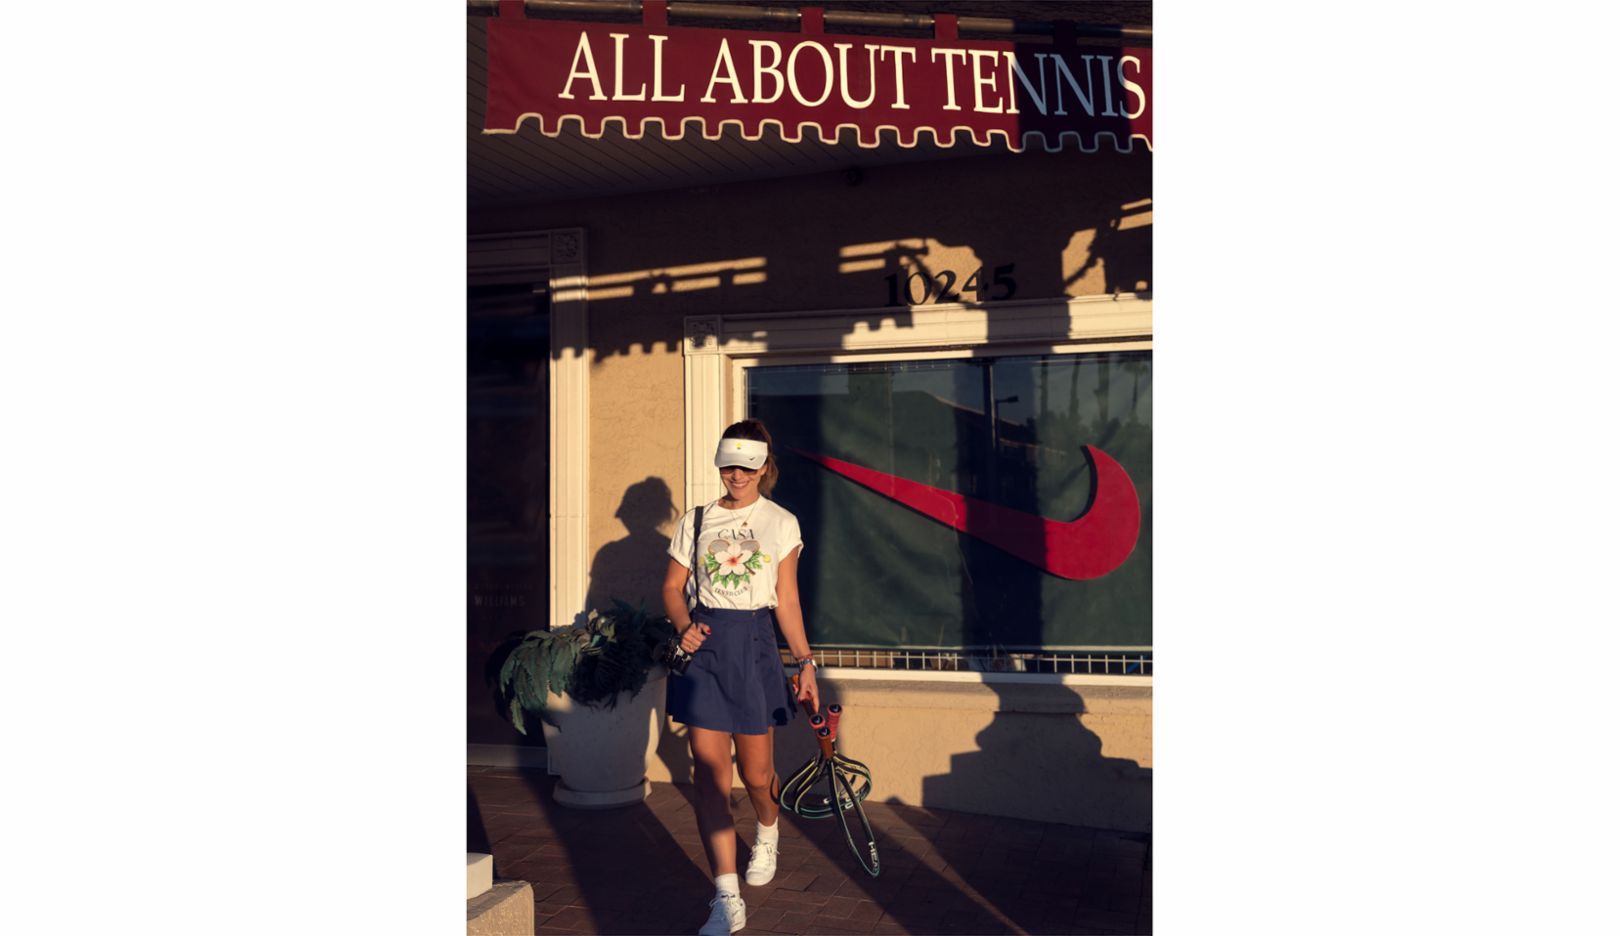 Radka Leitmeritz in front of her favorite tennis business in Scottsdale, Arizona. “I love to look around there. For example, when they’re stringing rackets.” She finds most of her outfits online, preferably vintage. The photographer thinks that female tennis players expressed their individuality more with their clothing in the 1980s and 90s, which is why she also collects tennis skirts from those two decades. 